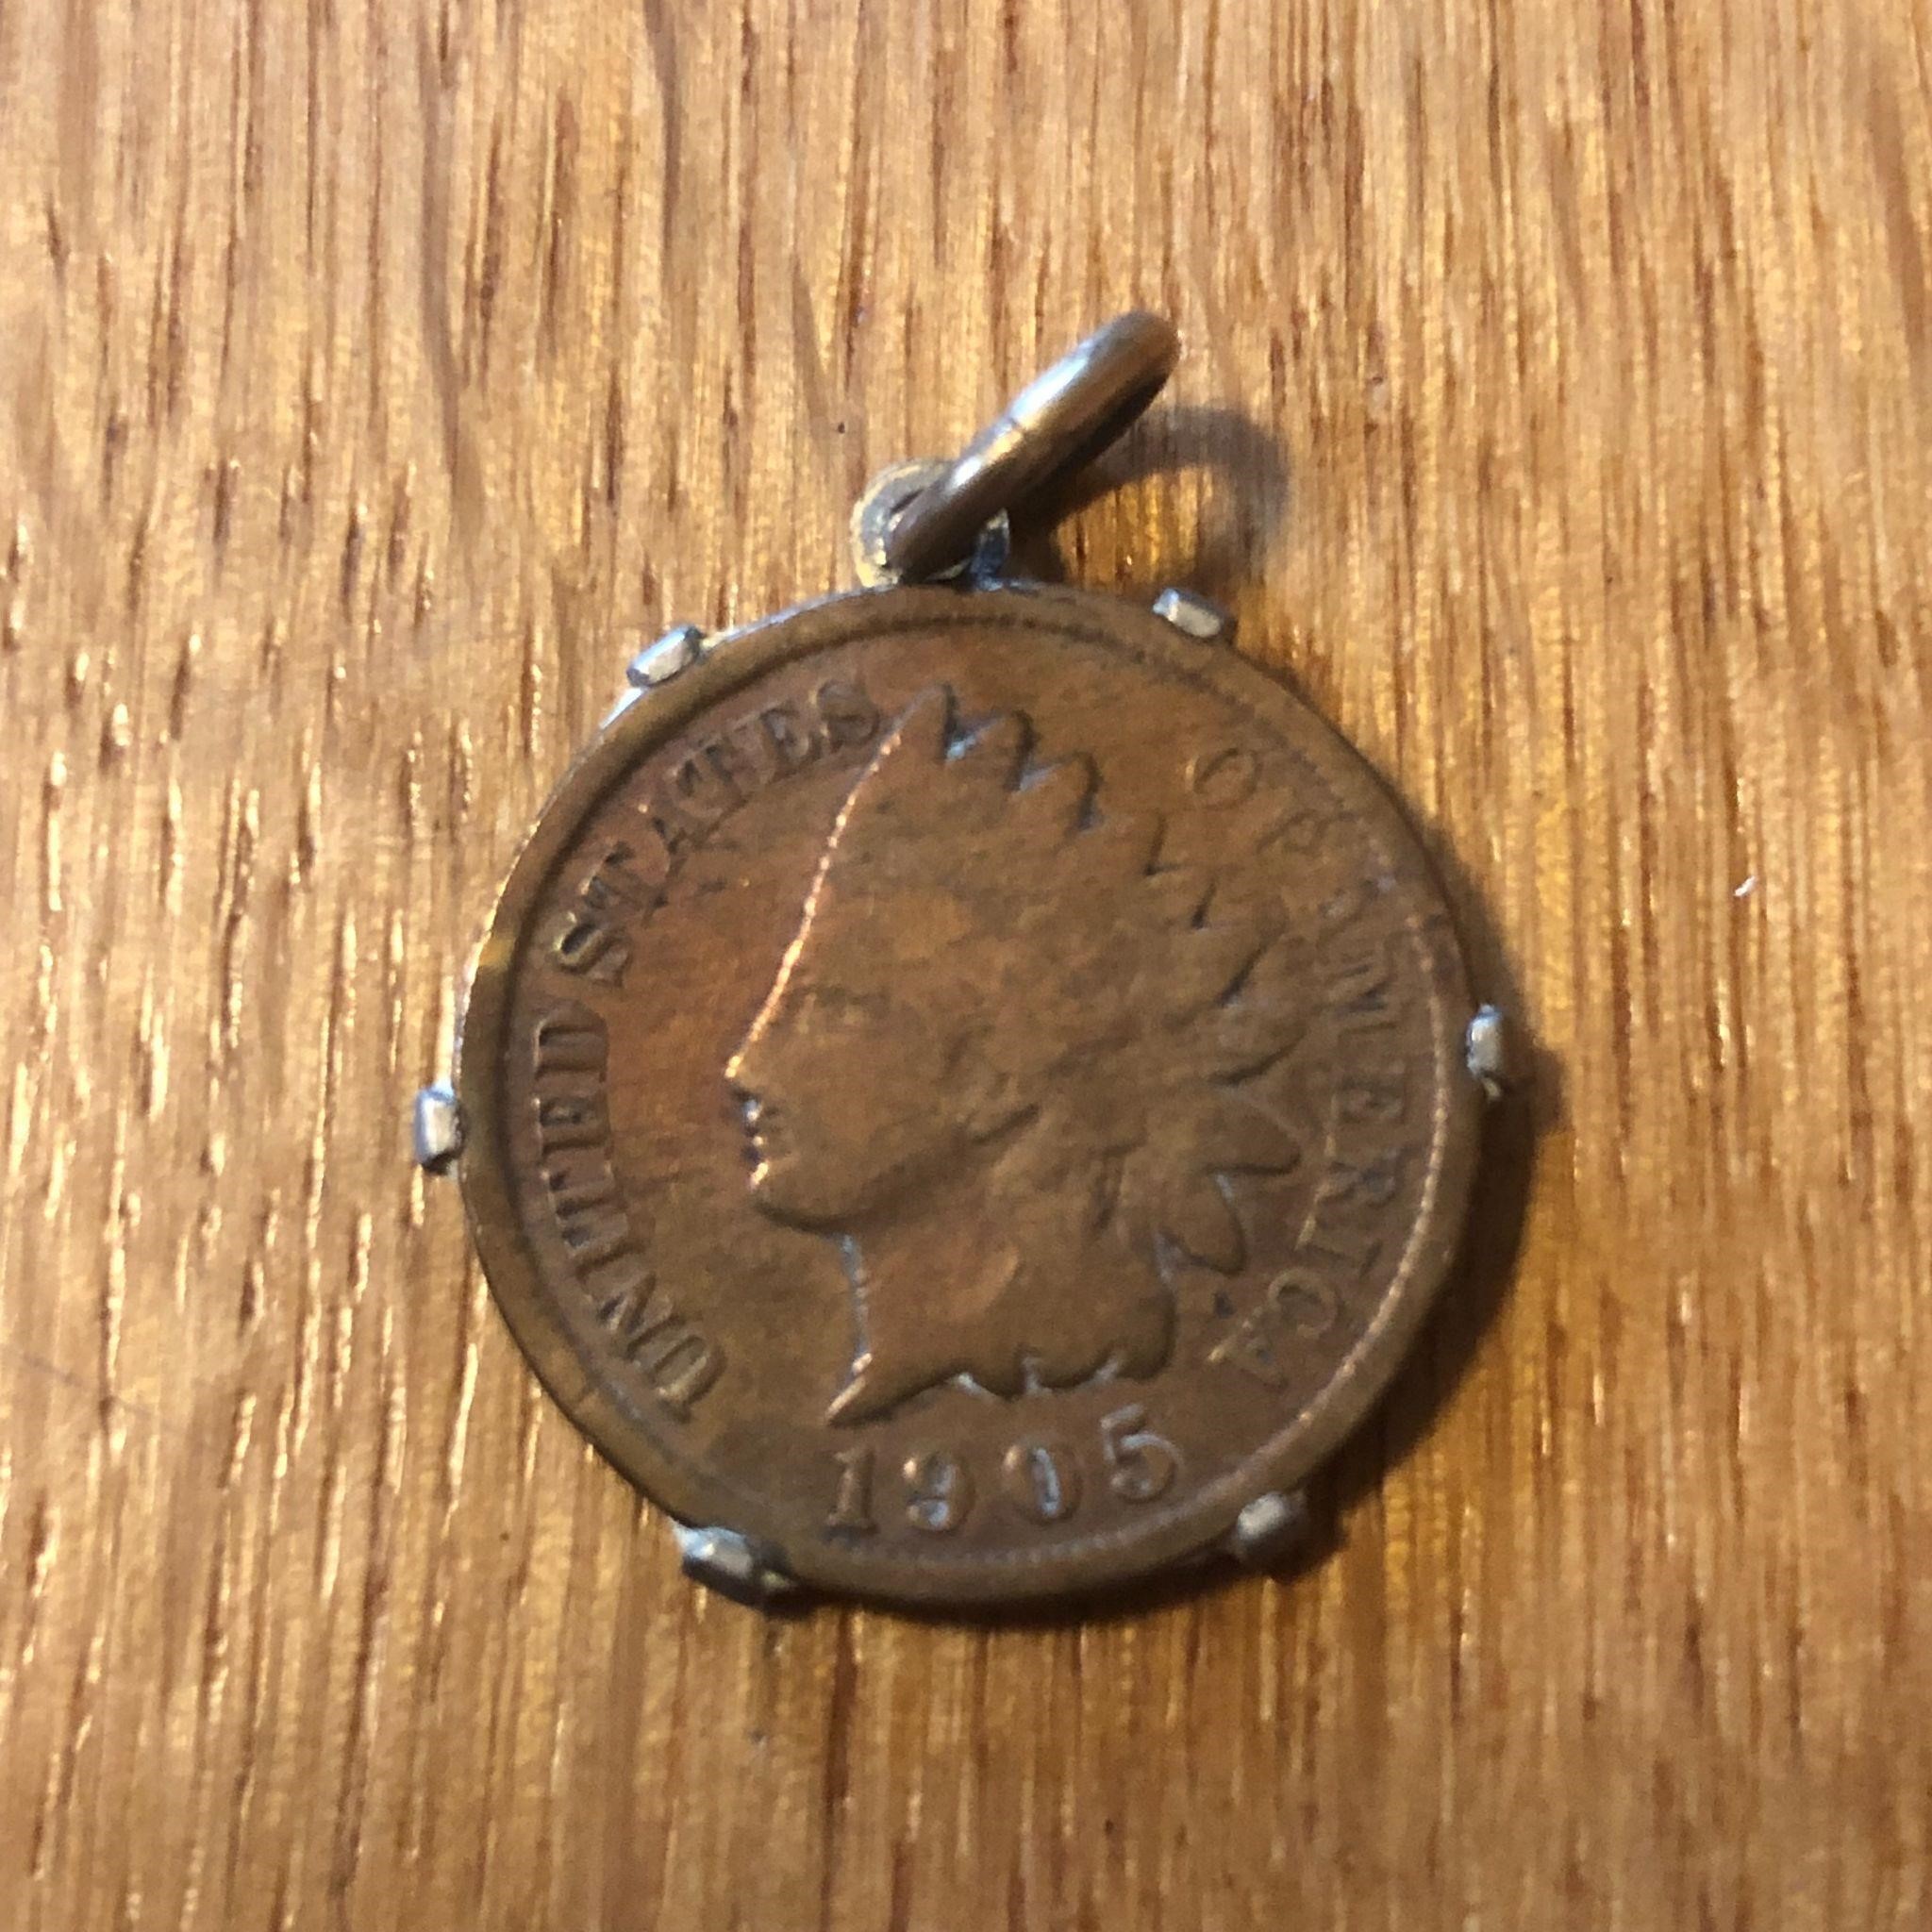 1905 Indian Head Penny Coin Pendant